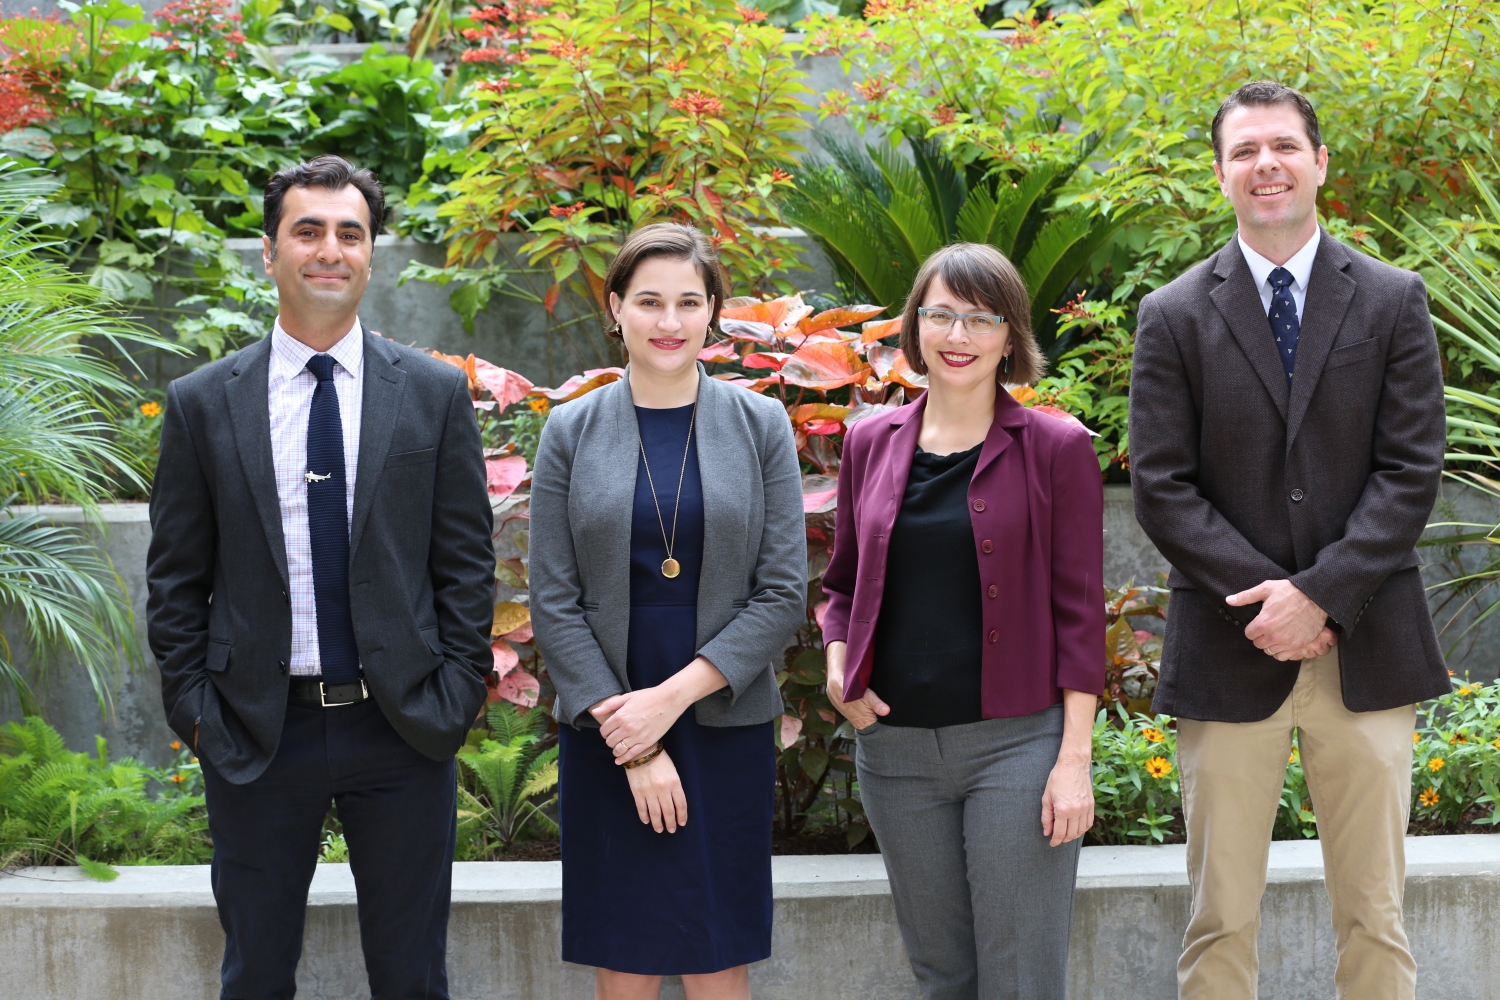 Image of HEP Core Faculty Members (from left to right): Dr. Azat Gündoğan, Dr. Arianne Johnson Quinn, Dr. Christina Owens, and Dr. Ross Moret. Also serves as photo link to Honors Experience Program's Landing Page